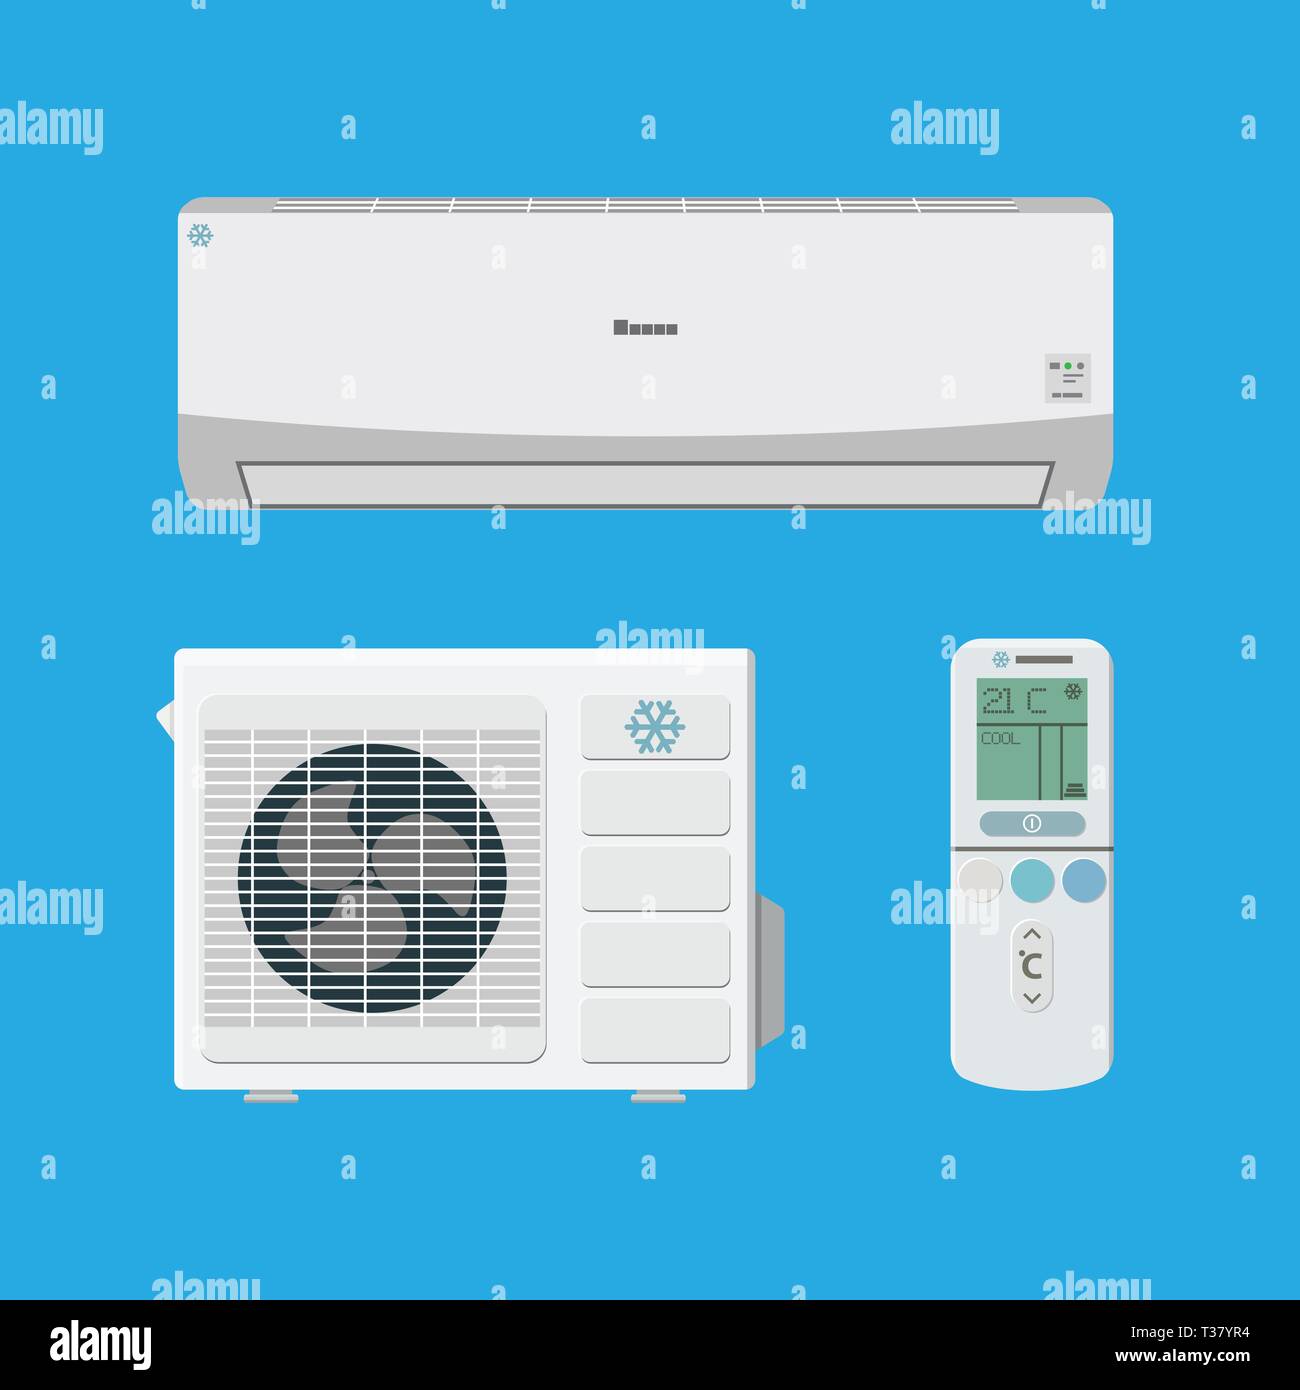 Air conditioner system. external and internal unit and remote control. vector illustration in flat style on blue background Stock Vector